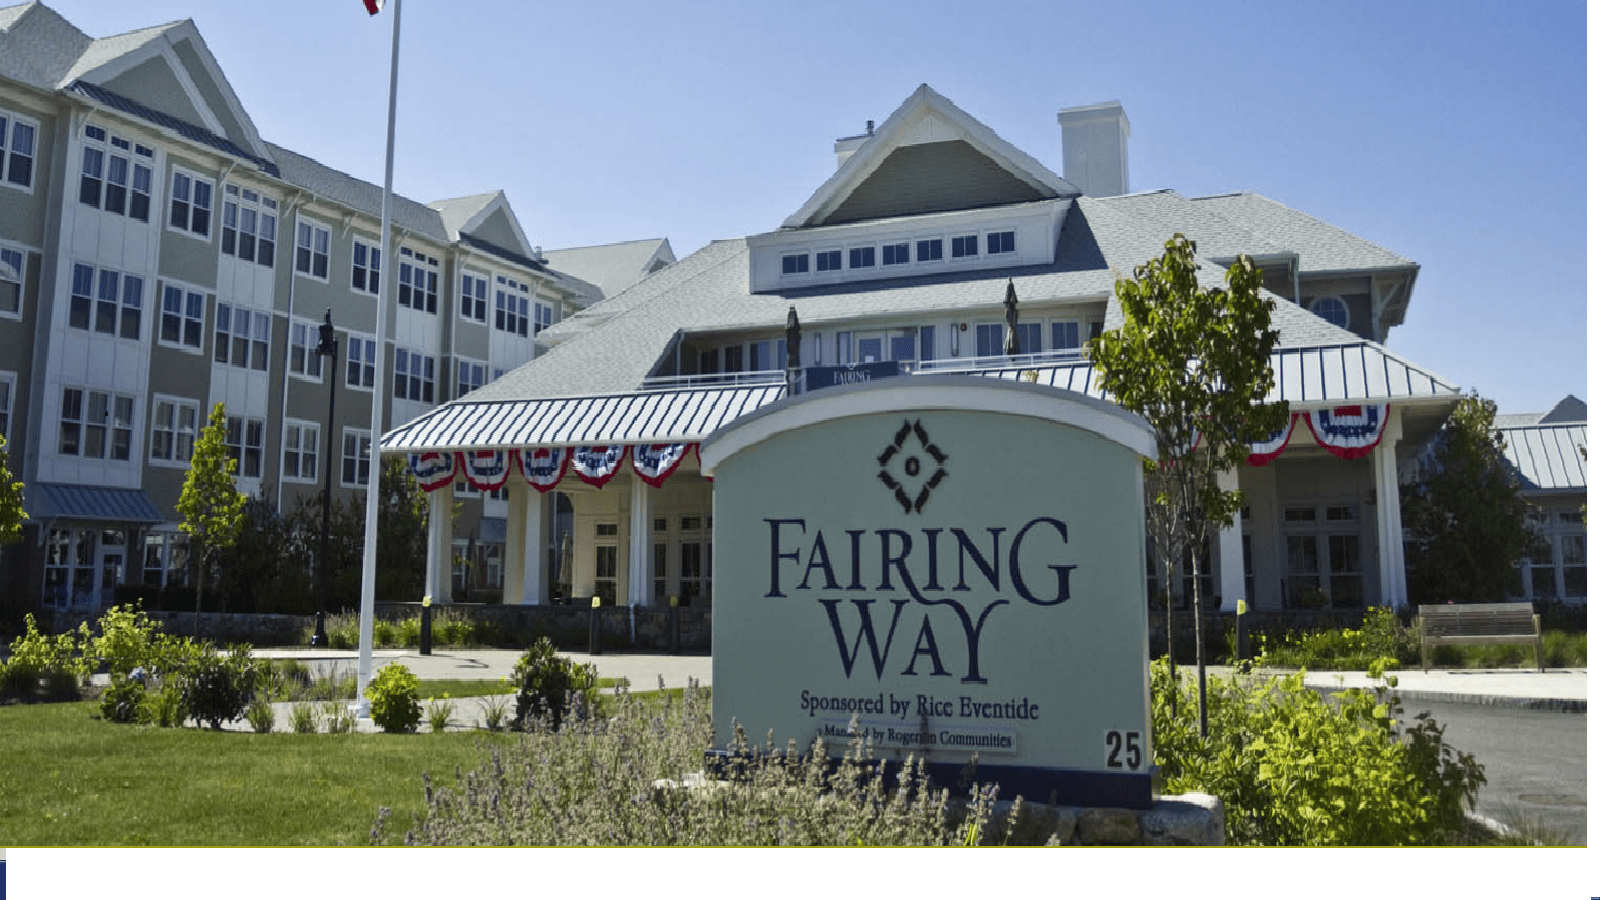 Fairing Way - A Rice Eventide Community